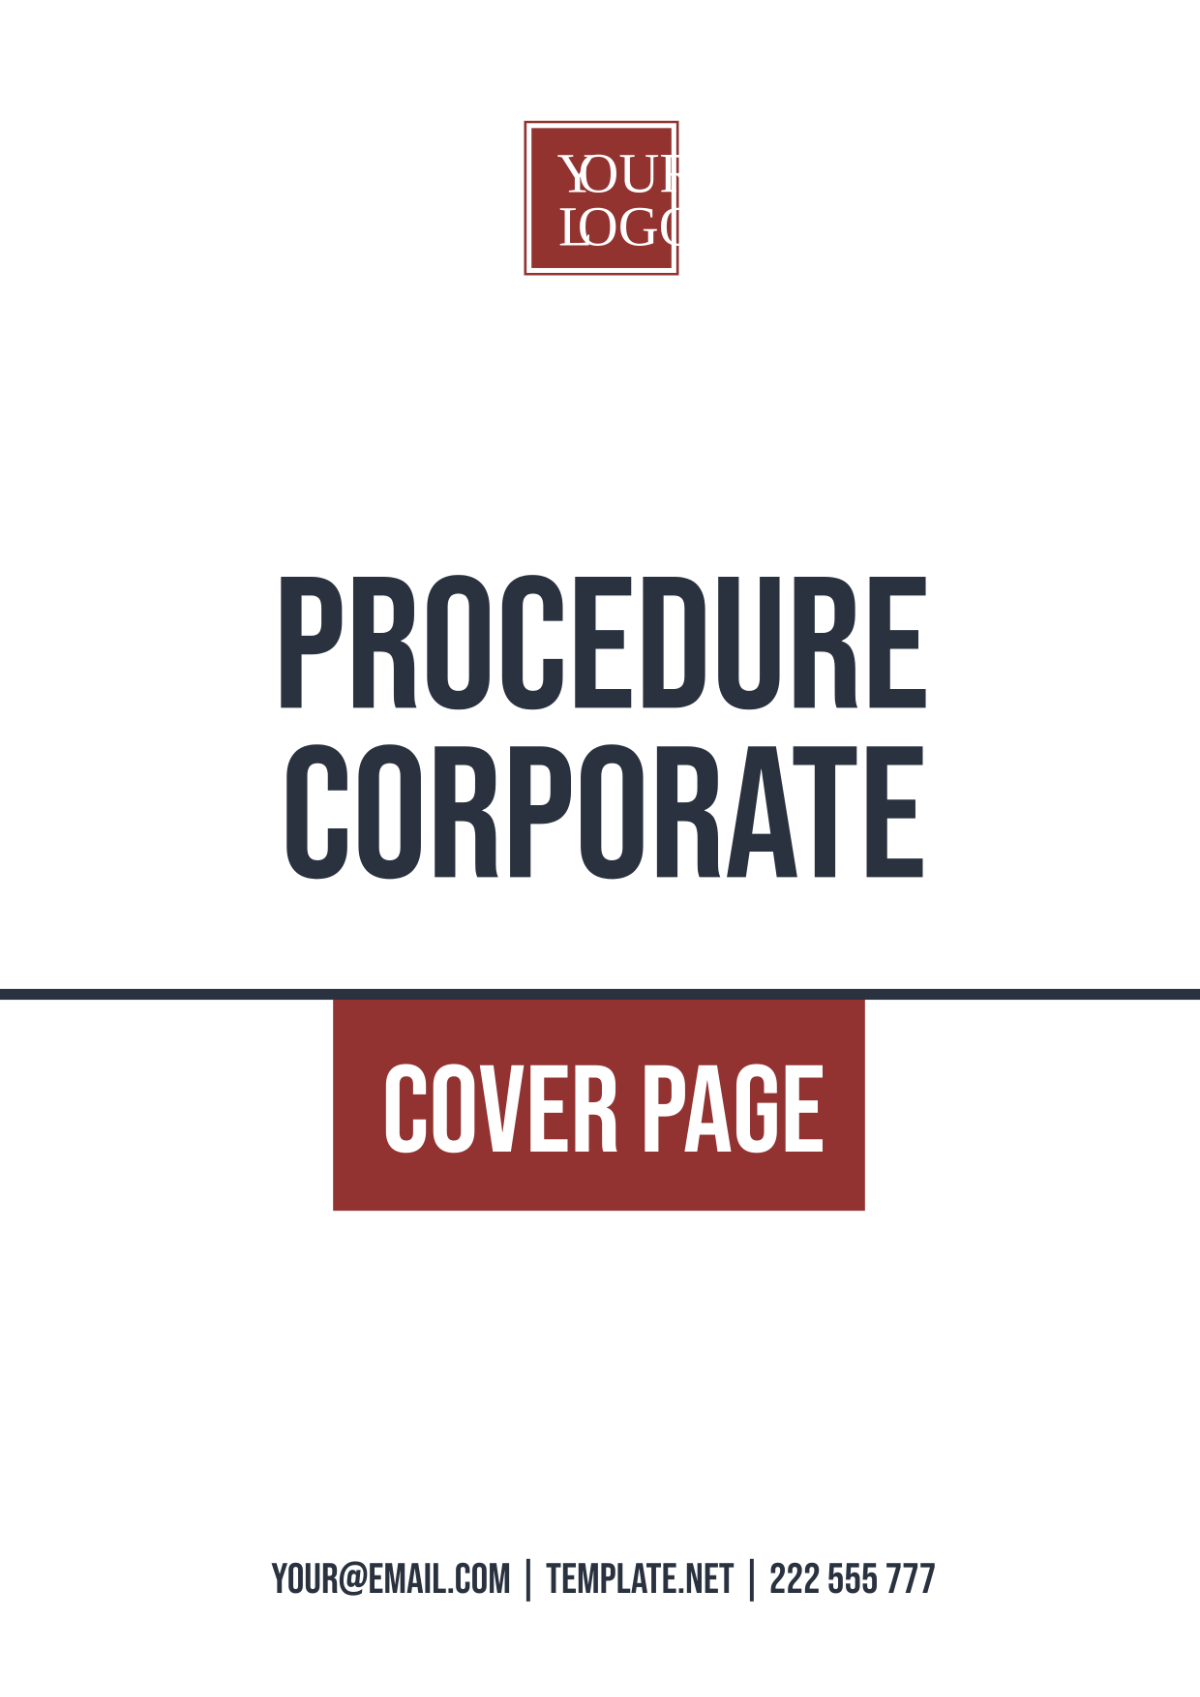 Free Procedure Corporate Cover Page Template